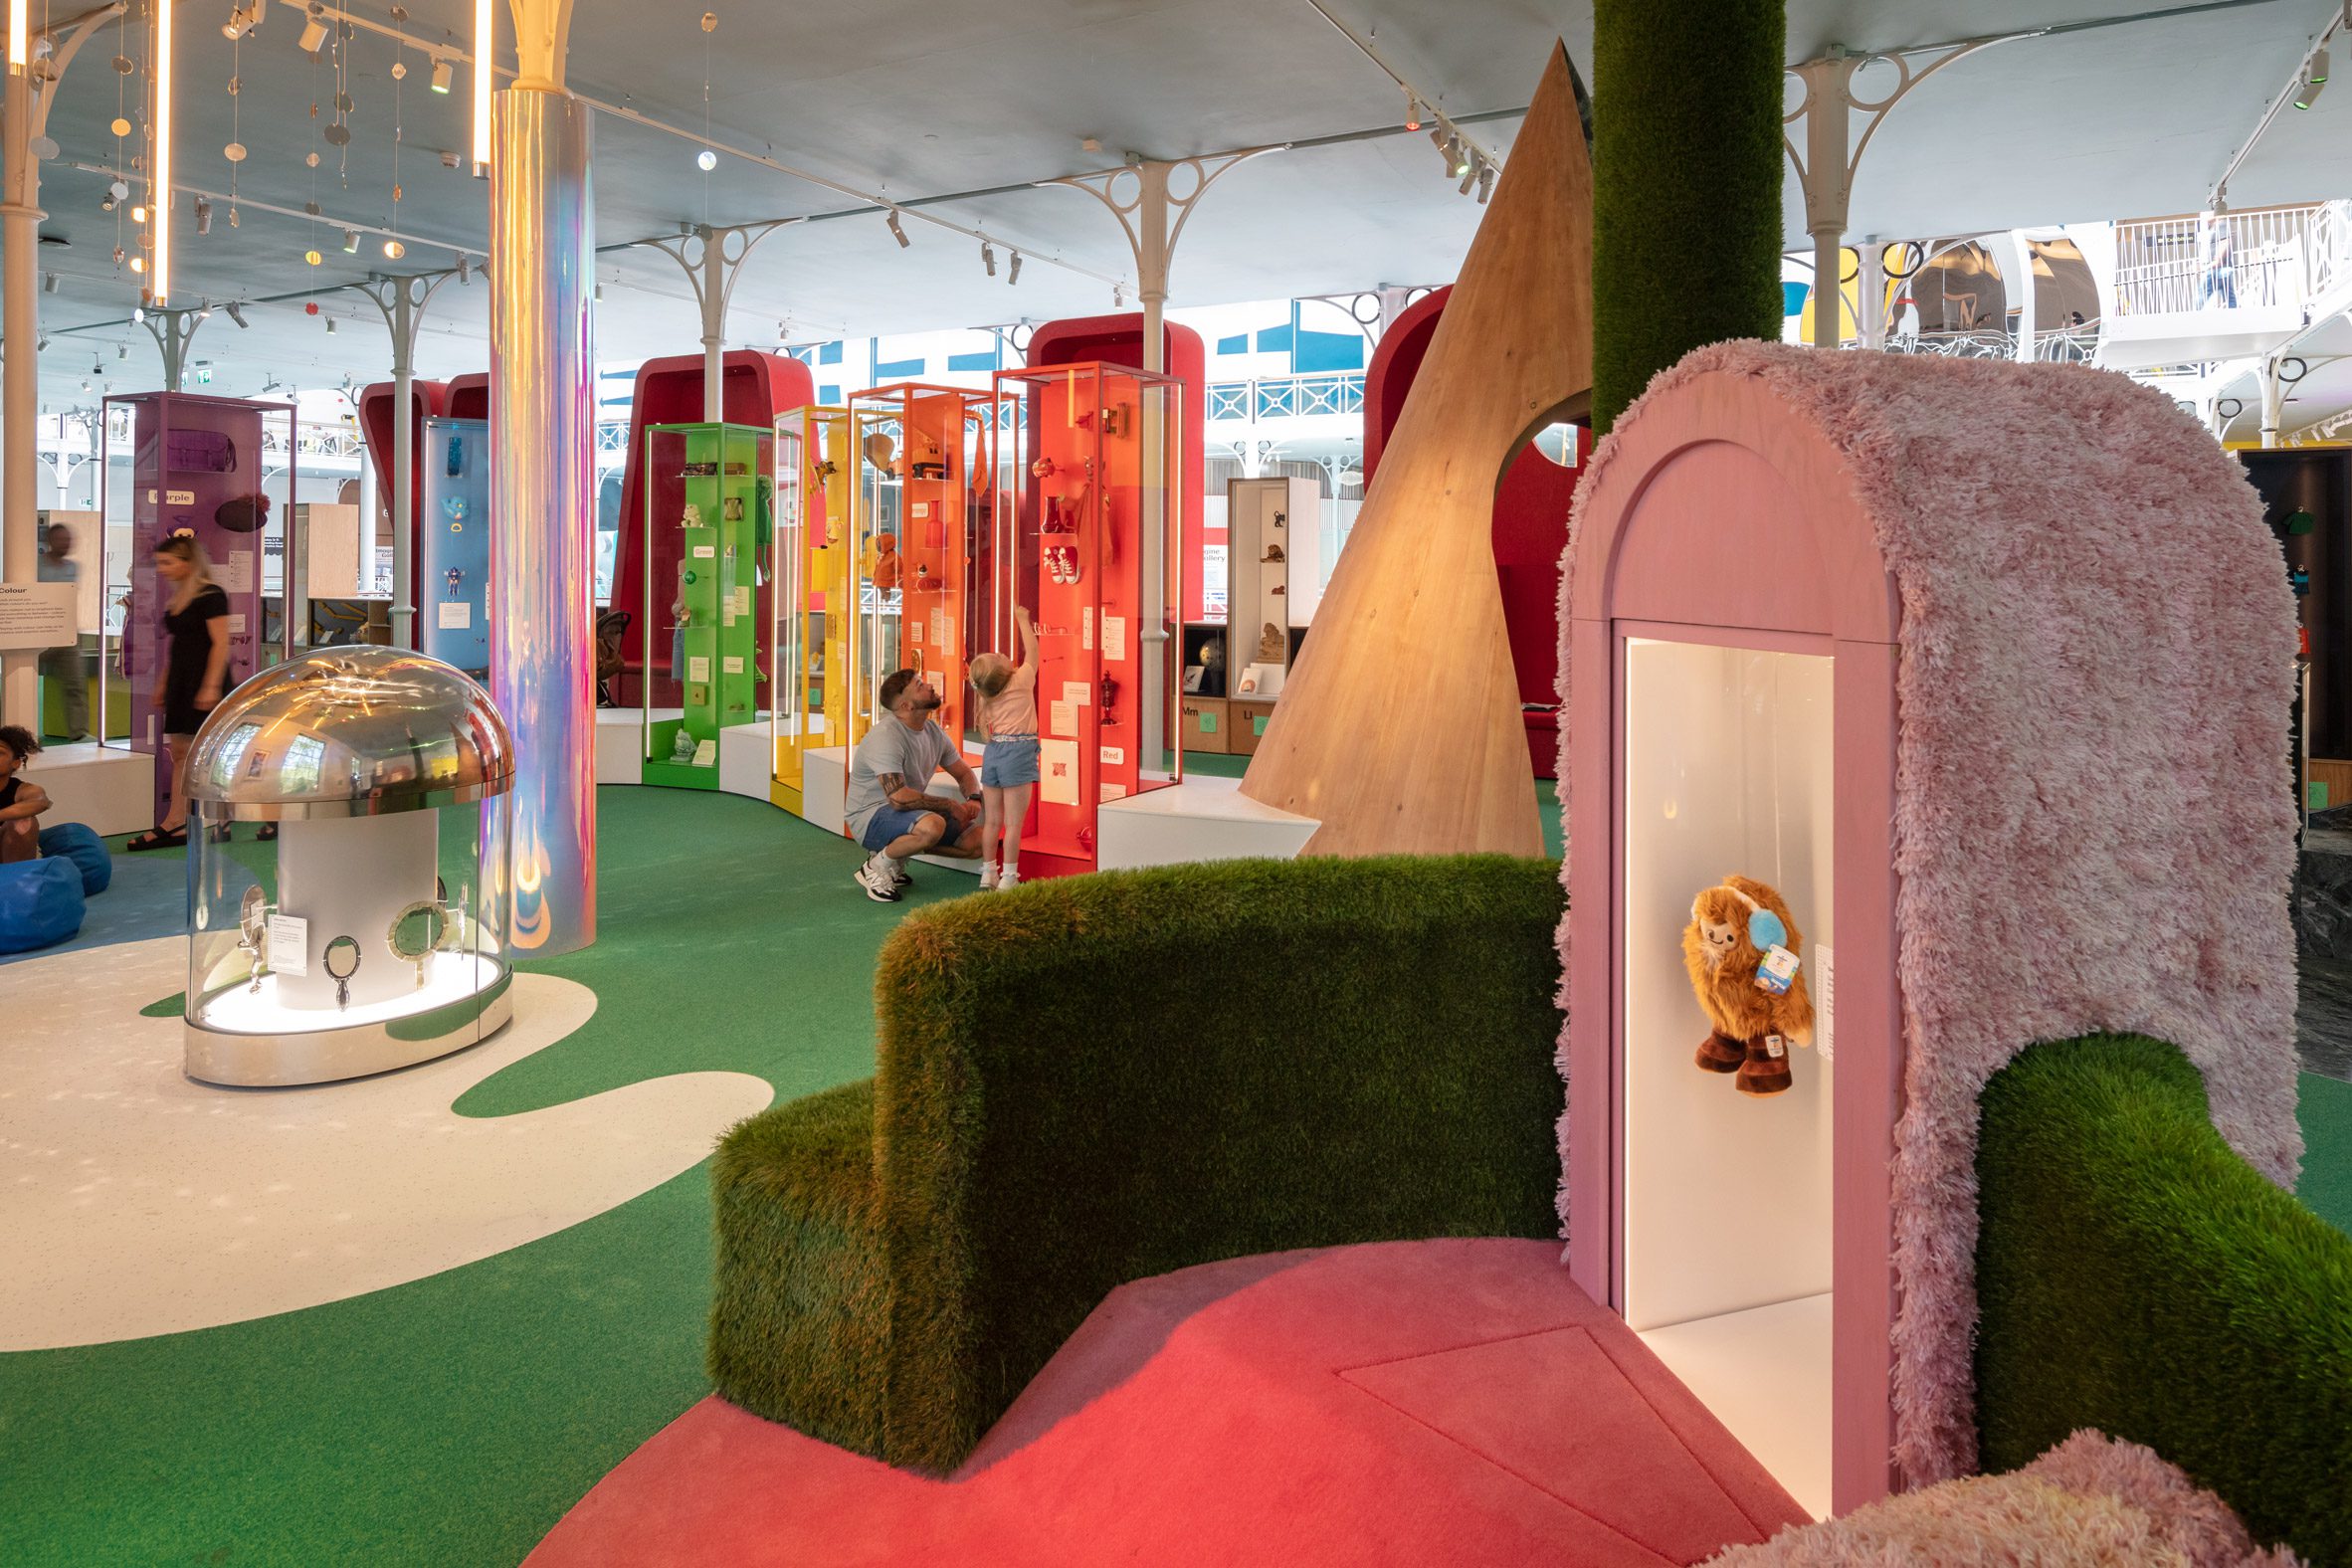 Play gallery with colourful exhibits